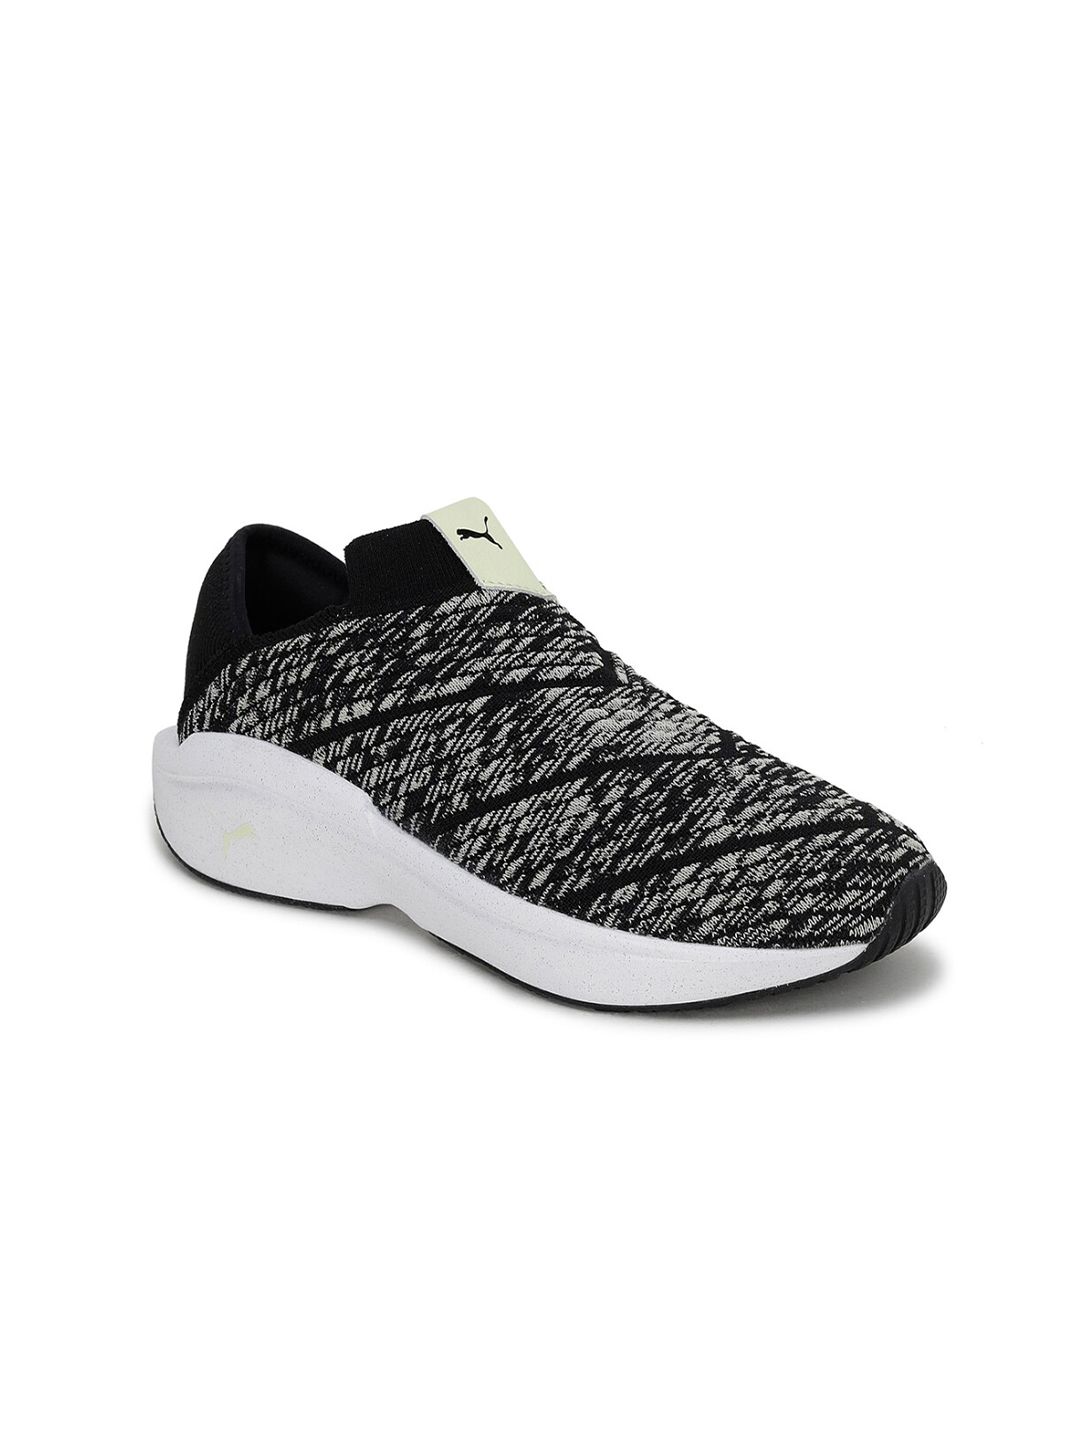 Puma Women Black Textile Training or Gym Shoes Price in India